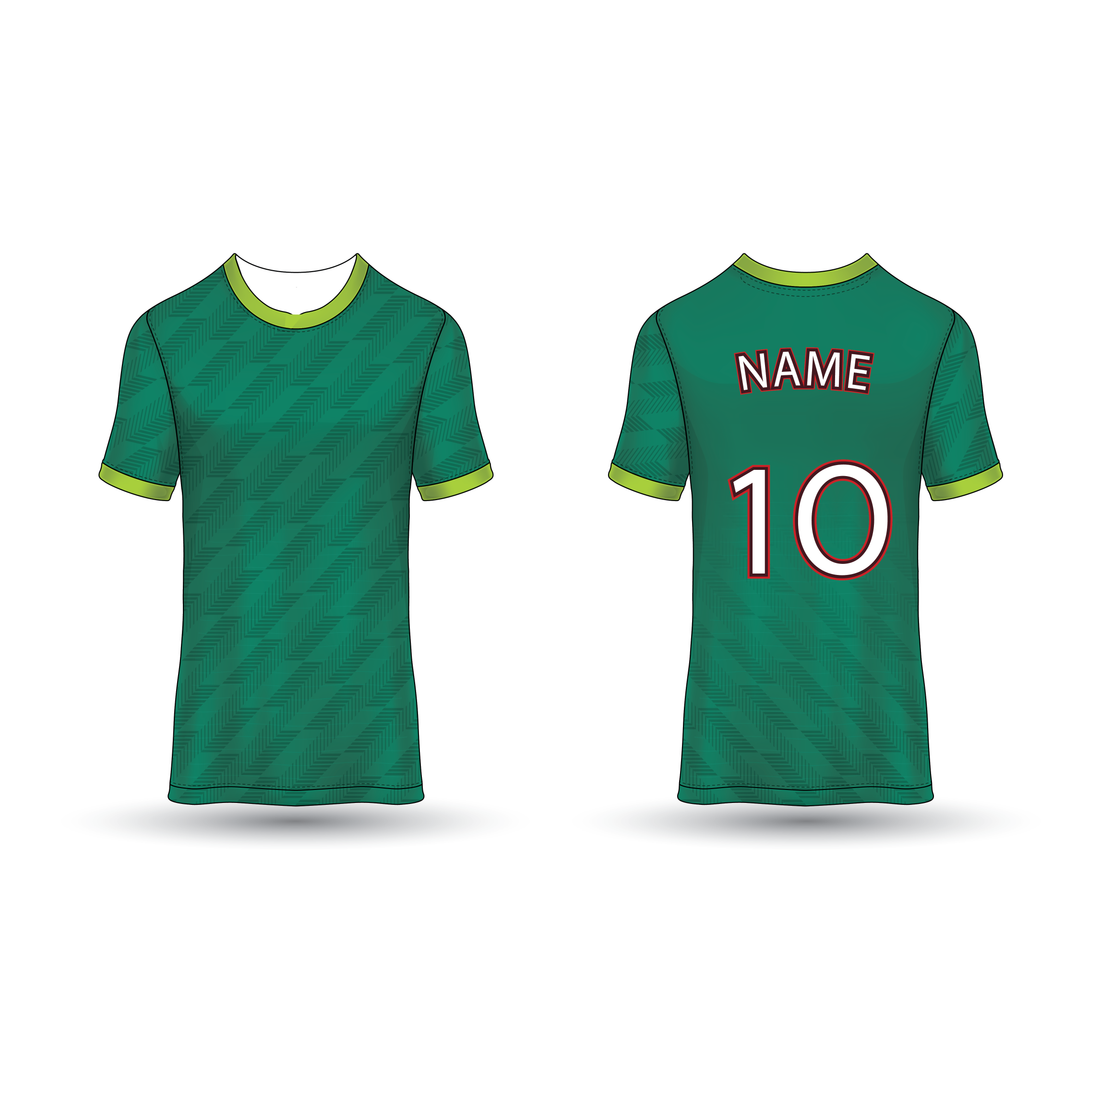 NEXT PRINT All Over Printed Customized Sublimation T-Shirt Unisex Sports Jersey Player Name & Number, Team Name NP50000212